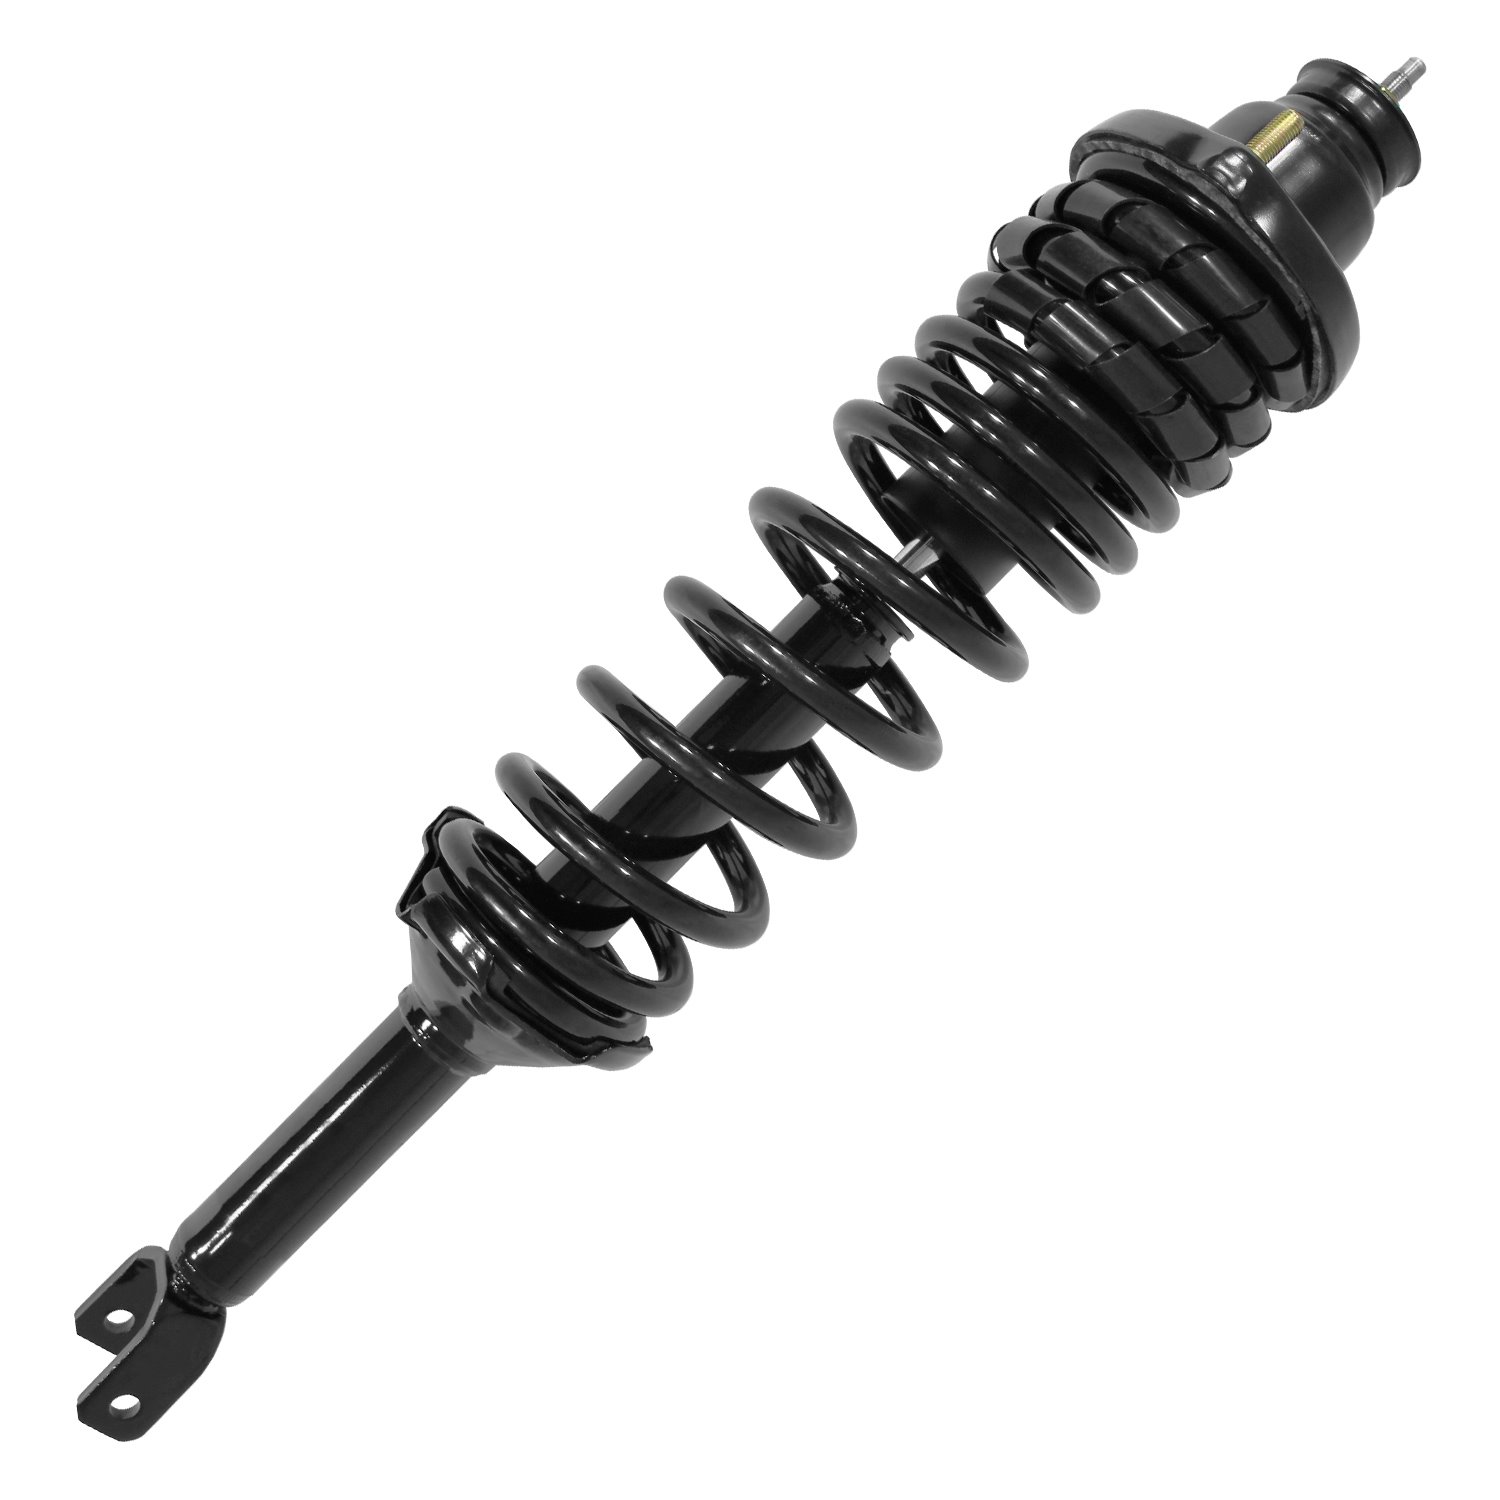 15142 Suspension Strut & Coil Spring Assembly Fits Select Acura CL, Honda Accord